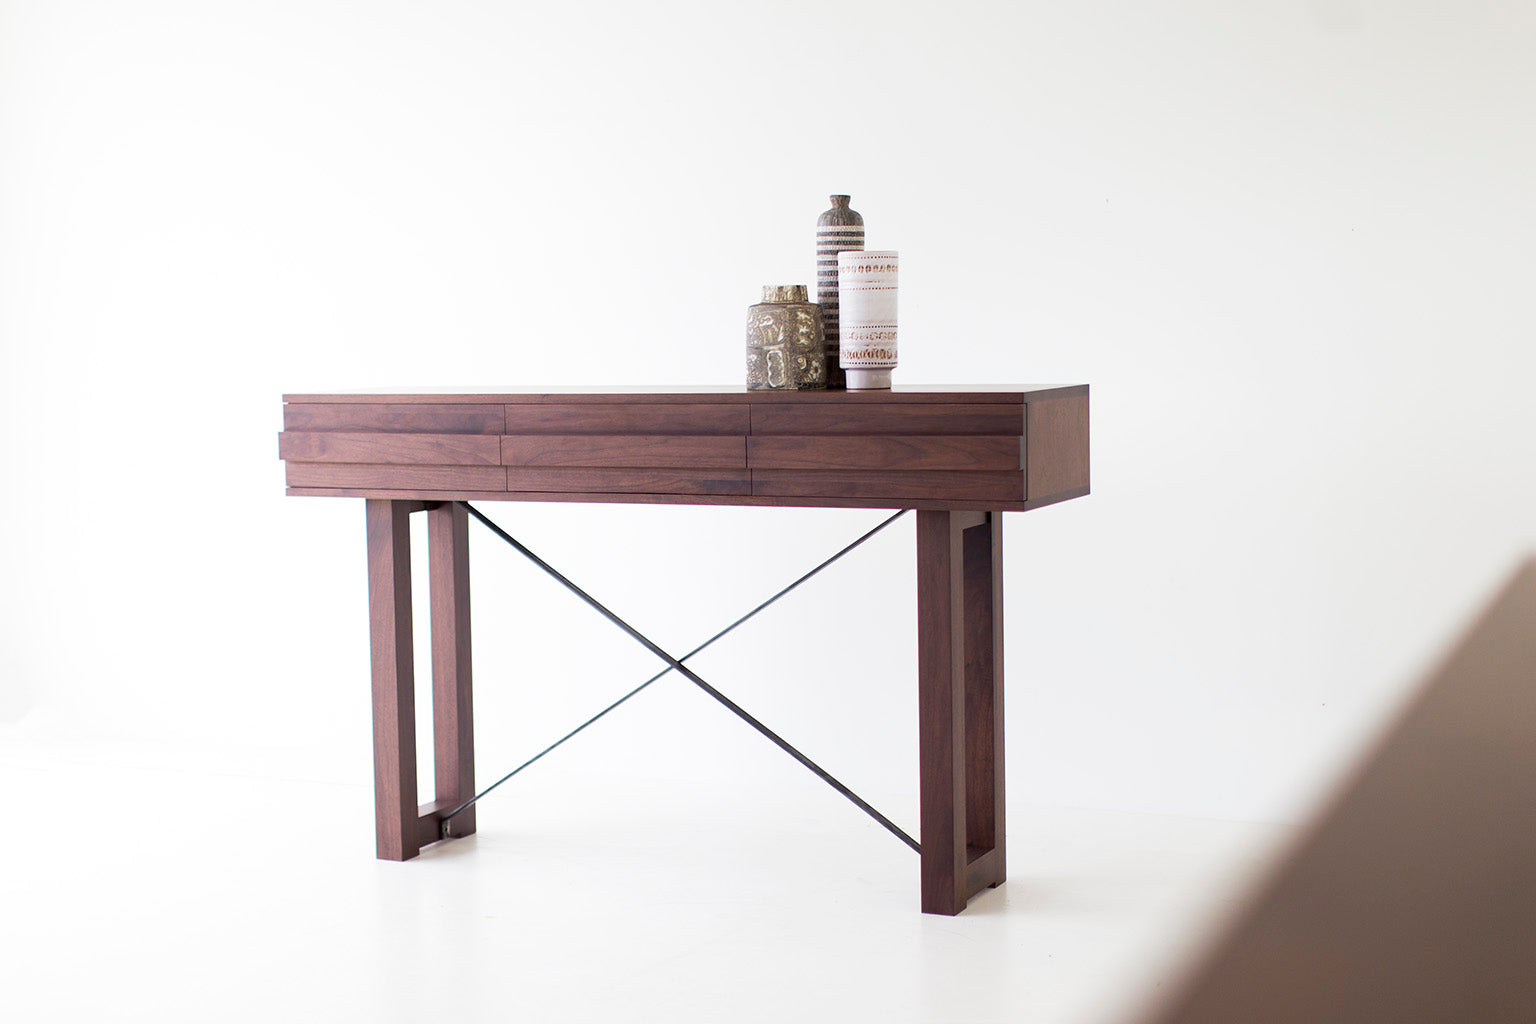 Industrial Modern Console Table with Drawers - 0216